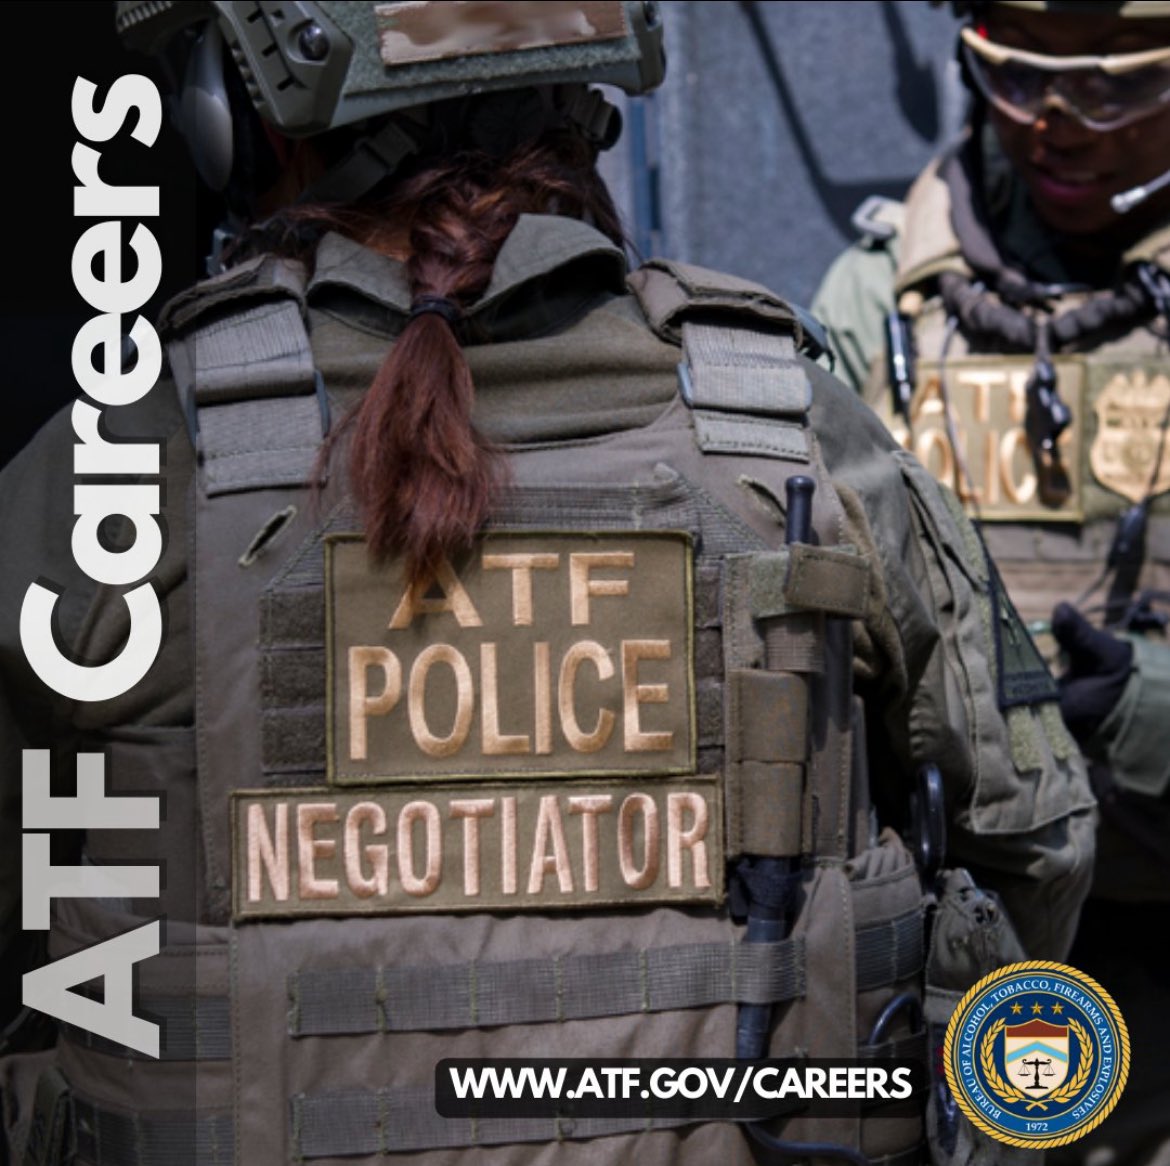 Join our elite team of ATF Criminal Investigators! We are looking for dedicated individuals to fill Special Agent GS 5•7•9 positions. Hiring Recent Graduates and College Seniors. Closes 4/1 or when 1K applications are received. Apply @USAJOBS usajobs.gov/job/782961100 #ATFJobs